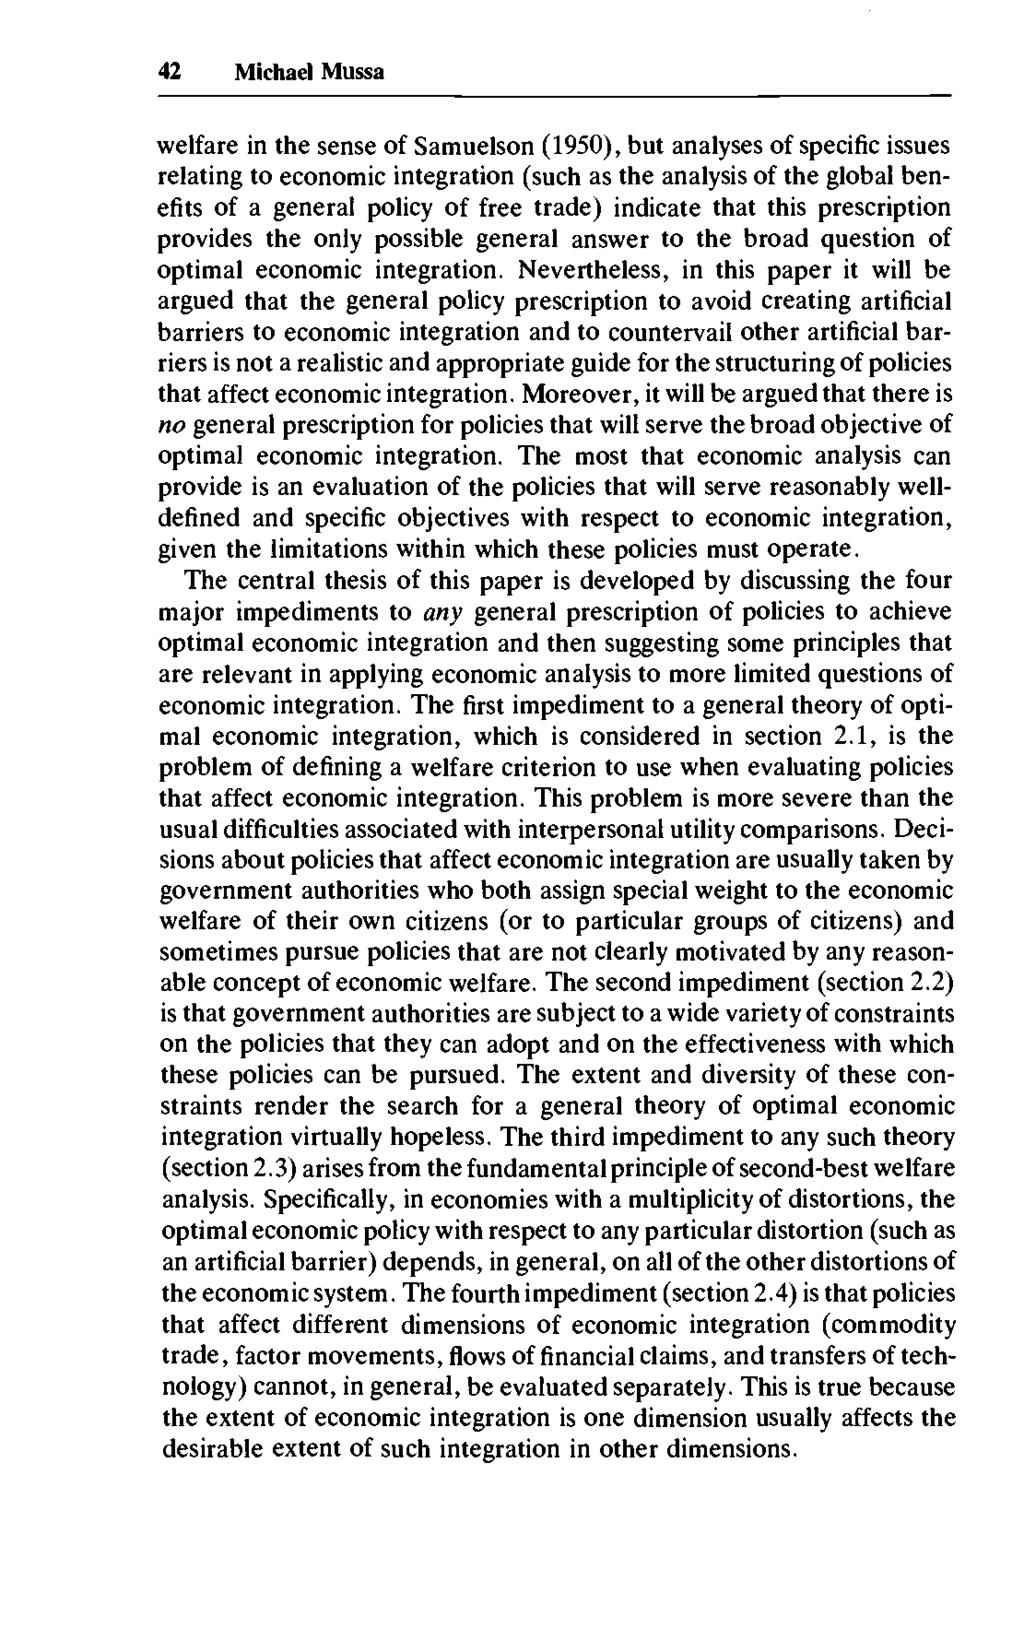 42 Michael Mussa welfare in the sense of Samuelson (1950), but analyses of specific issues relating to economic integration (such as the analysis of the global benefits of a general policy of free